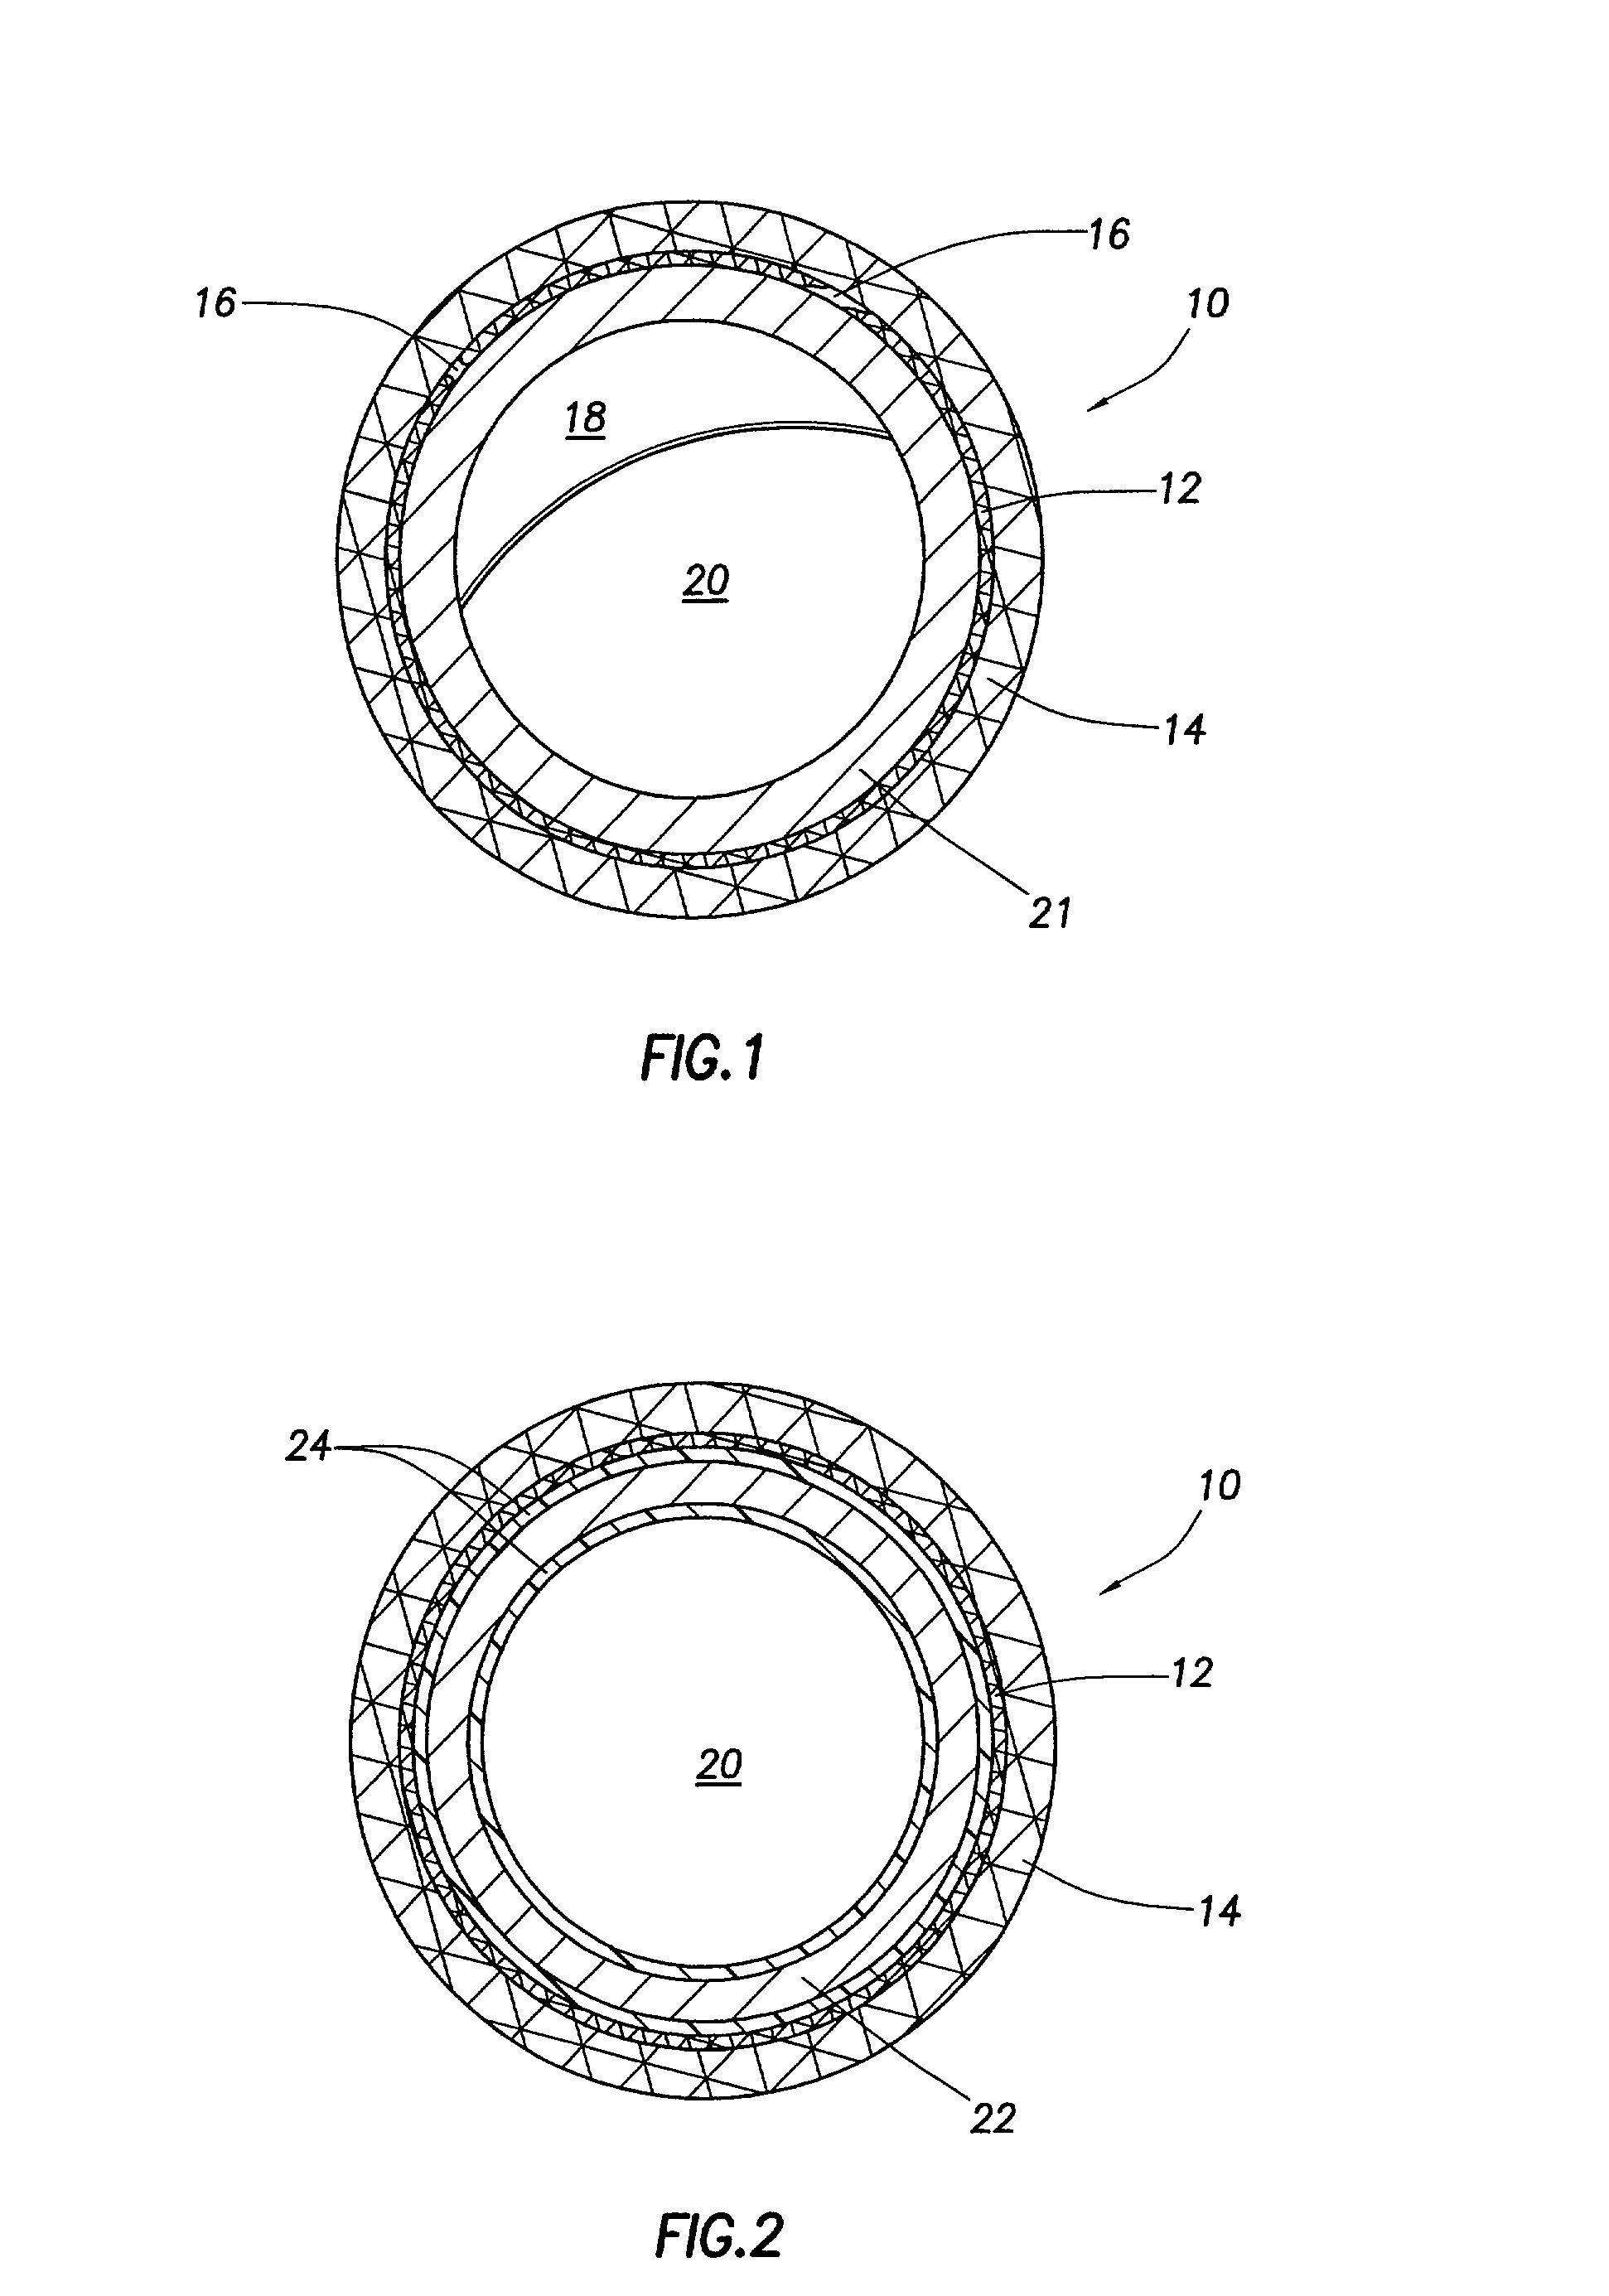 Stent coatings containing HMG-CoA reductase inhibitors